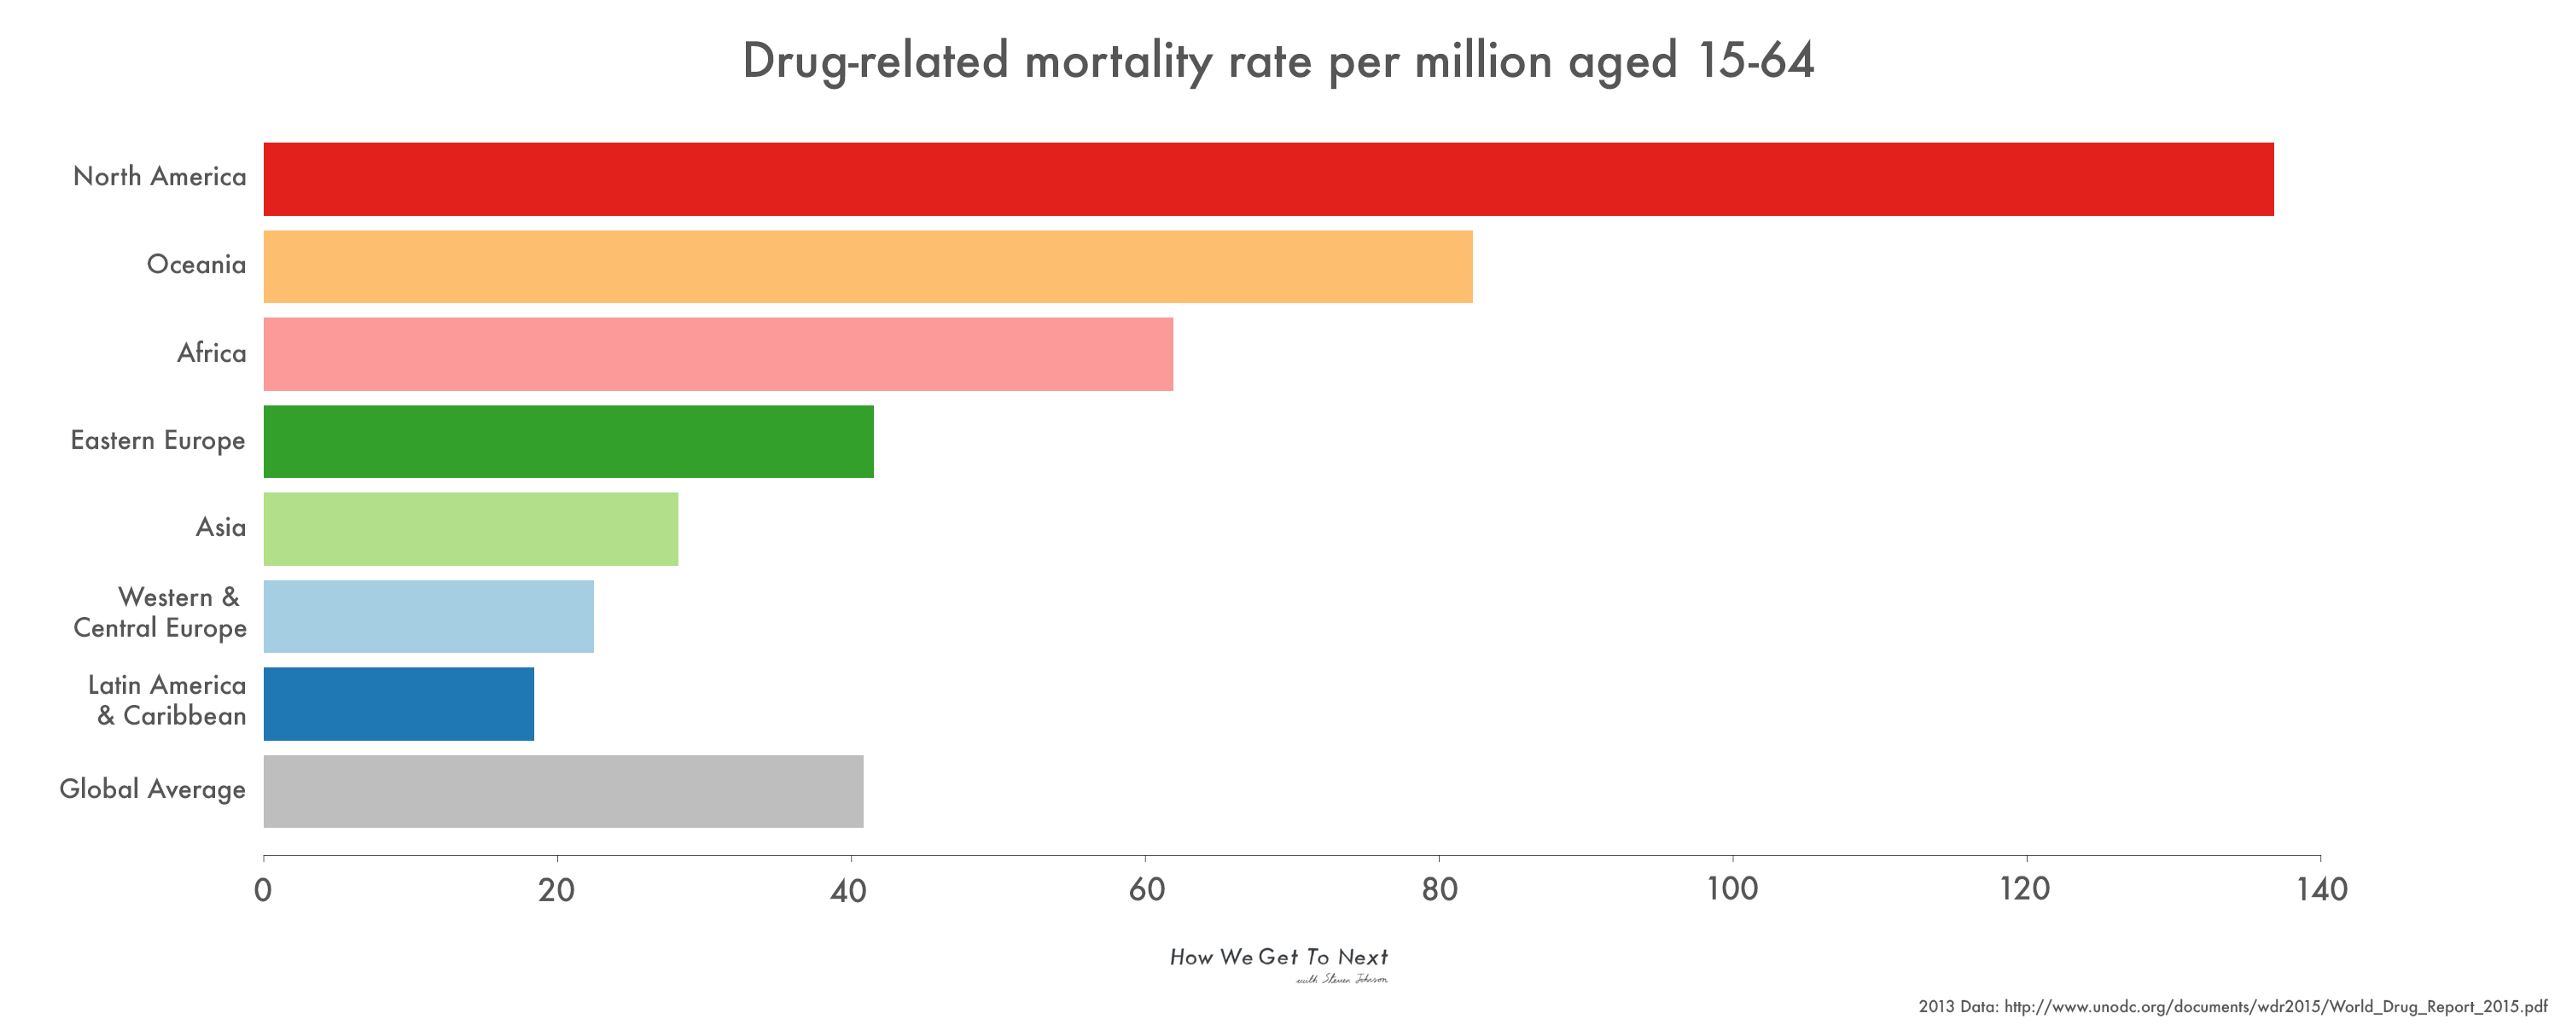 A bar chart of drug-related mortality rate per million aged 15-64. In North America it's nearly 140, Oceania around 80, Africa around 60, Eastern Europe around 40 (also the global average), Asia around 25, Western Europe around 23, Latin America around 18.